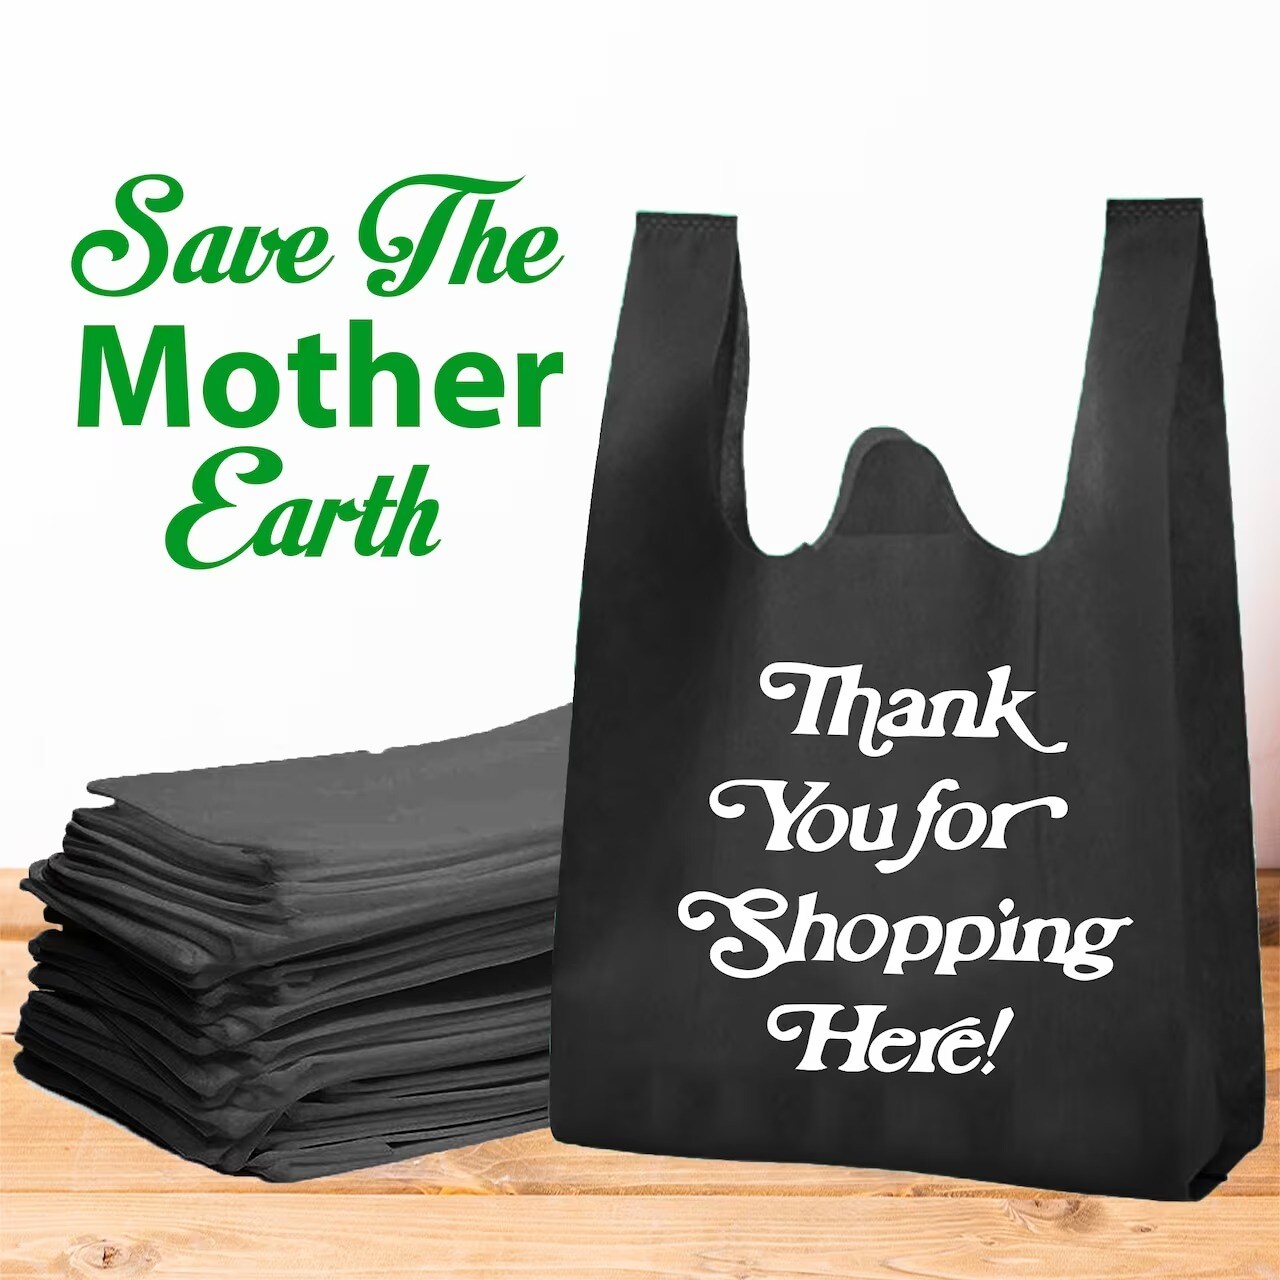 Small Business Shopping Bags, multipack